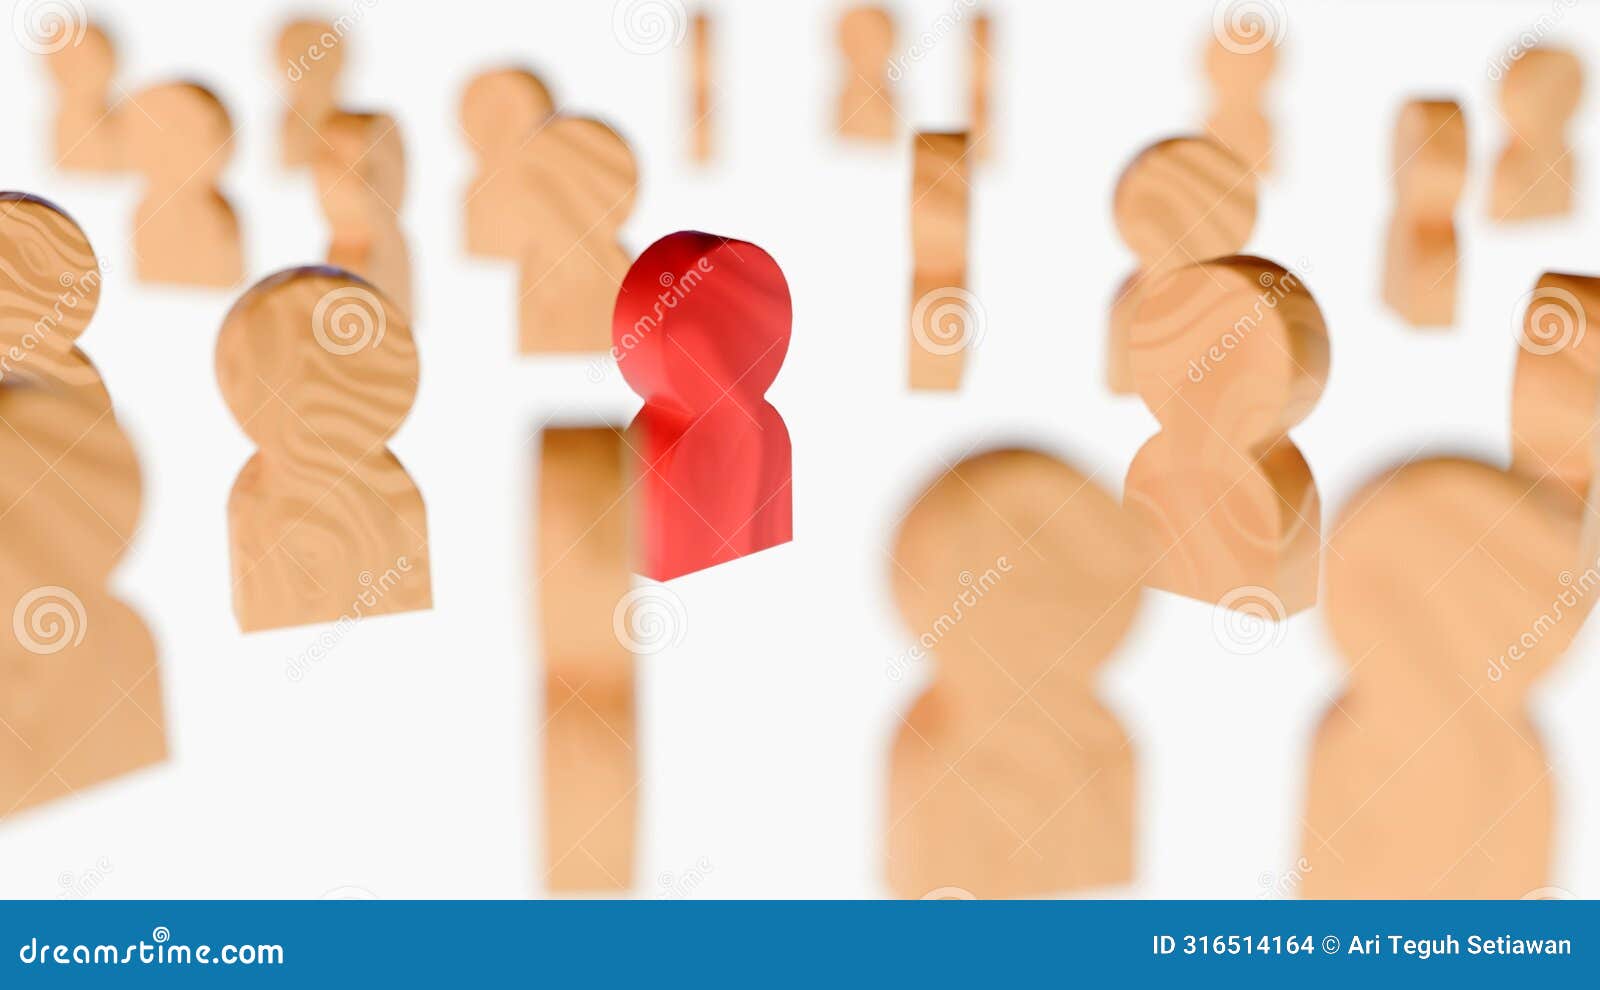 3d rendering of red human figurine among wooden figurines